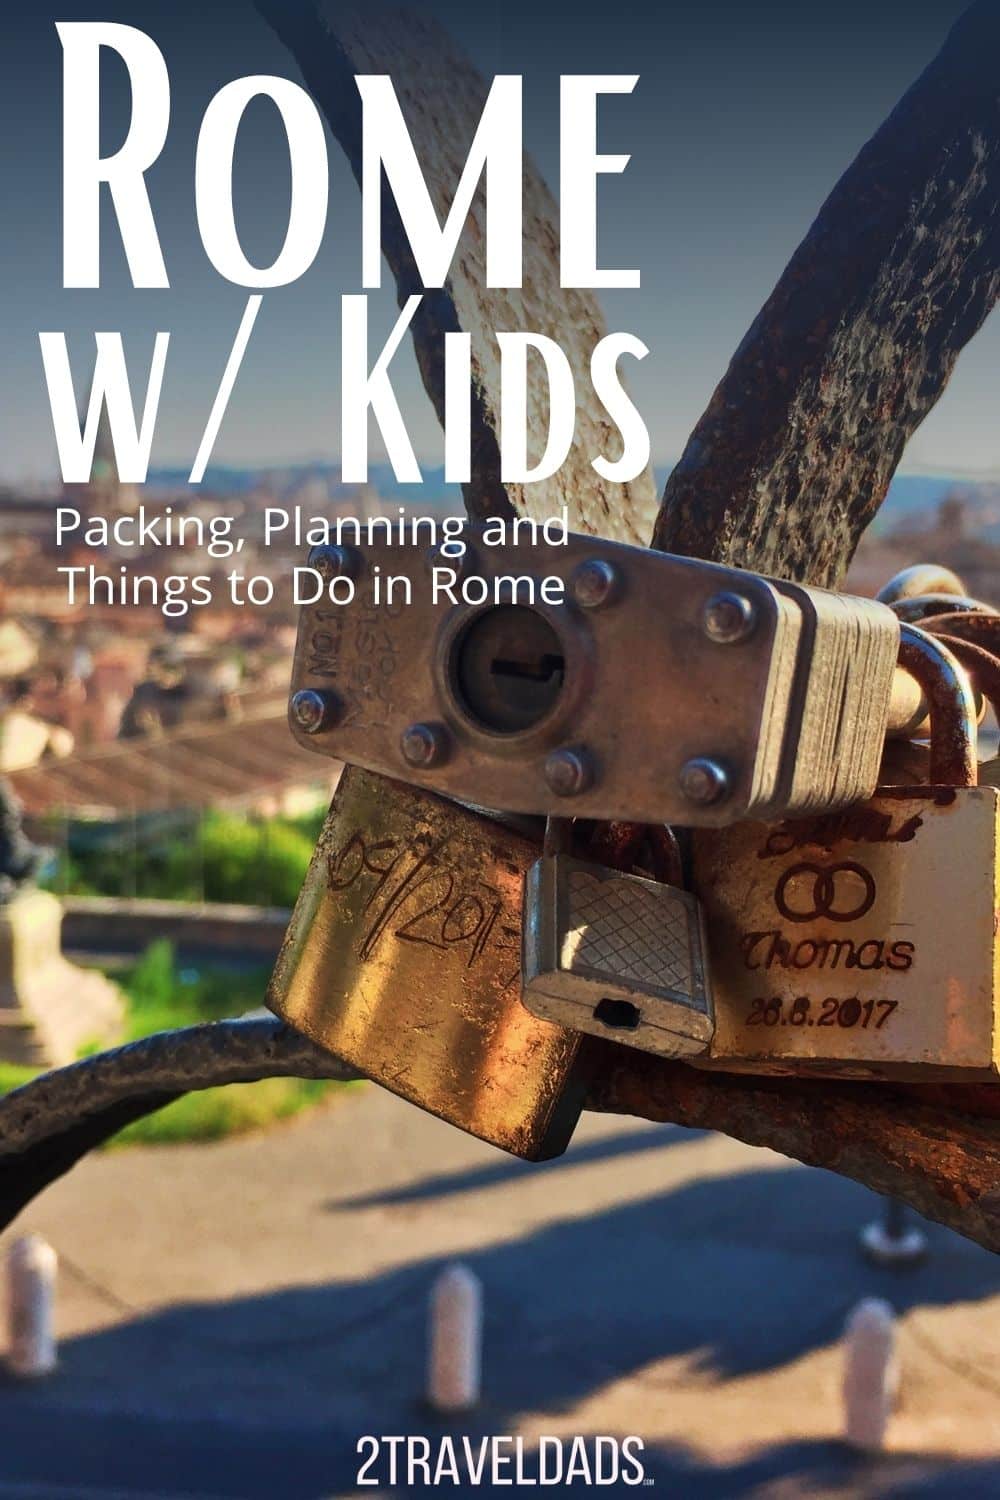 Rome with kids is an exciting trip not to be forgotten. Tips for planning, where to stay and best things to do in Rome with kids.